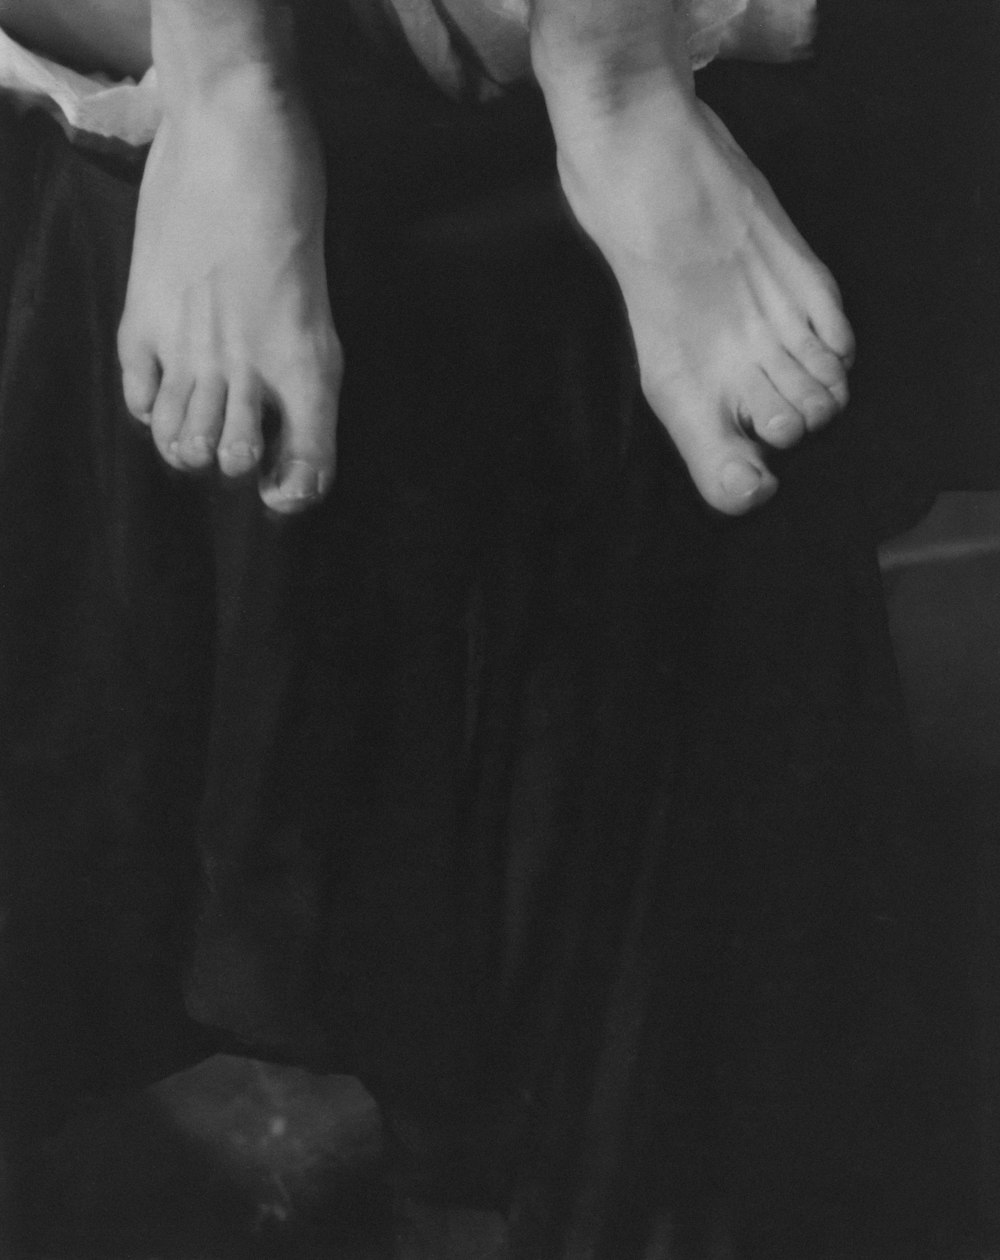 a black and white photo of a person's bare feet